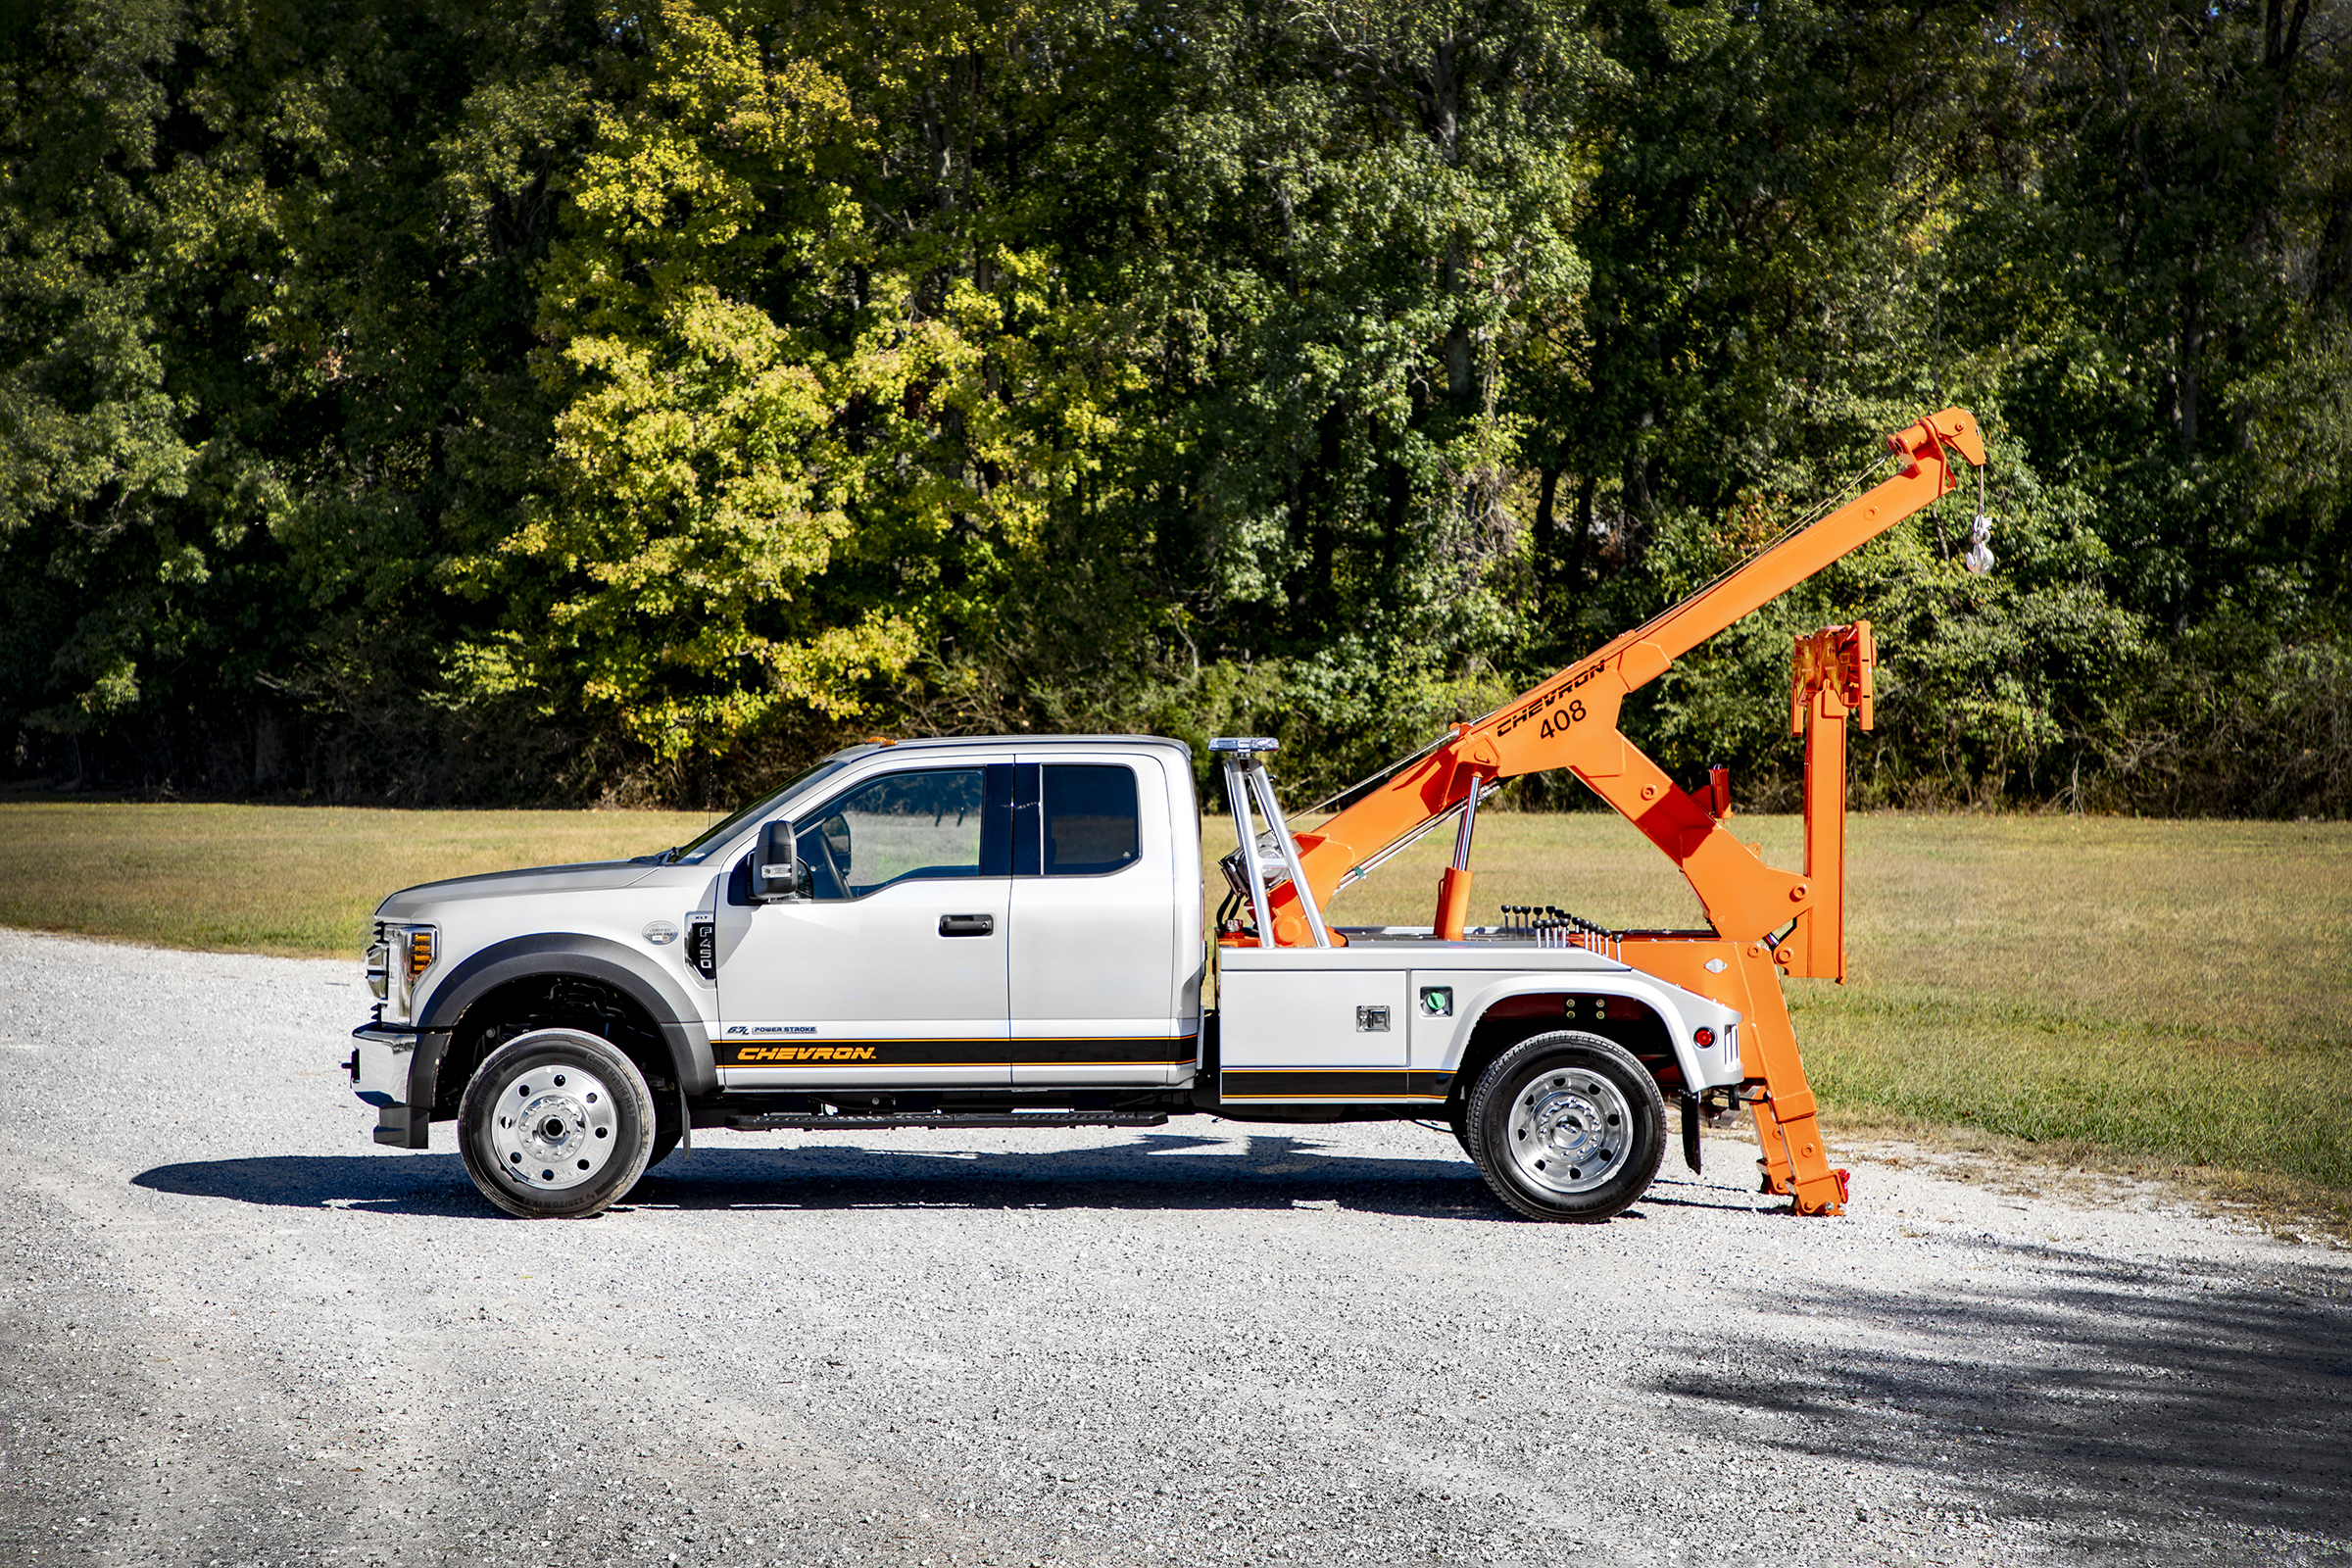 Chevron™ 408 Light-Duty Autoloader comes with an extendable hydraulic recovery boom